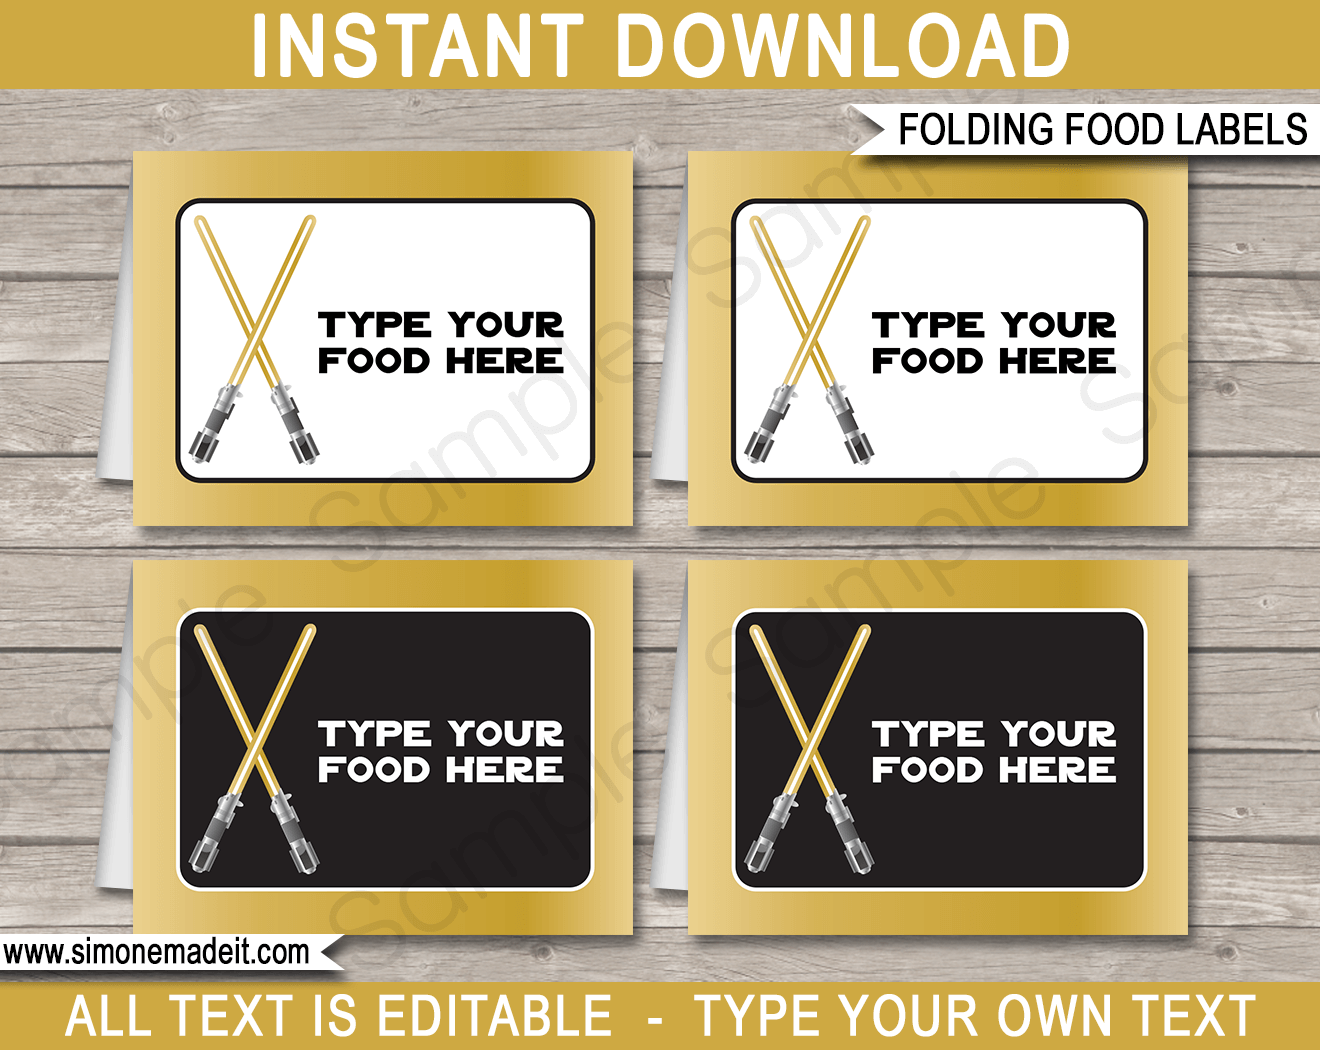 gold-star-wars-food-labels-place-cards-birthday-party